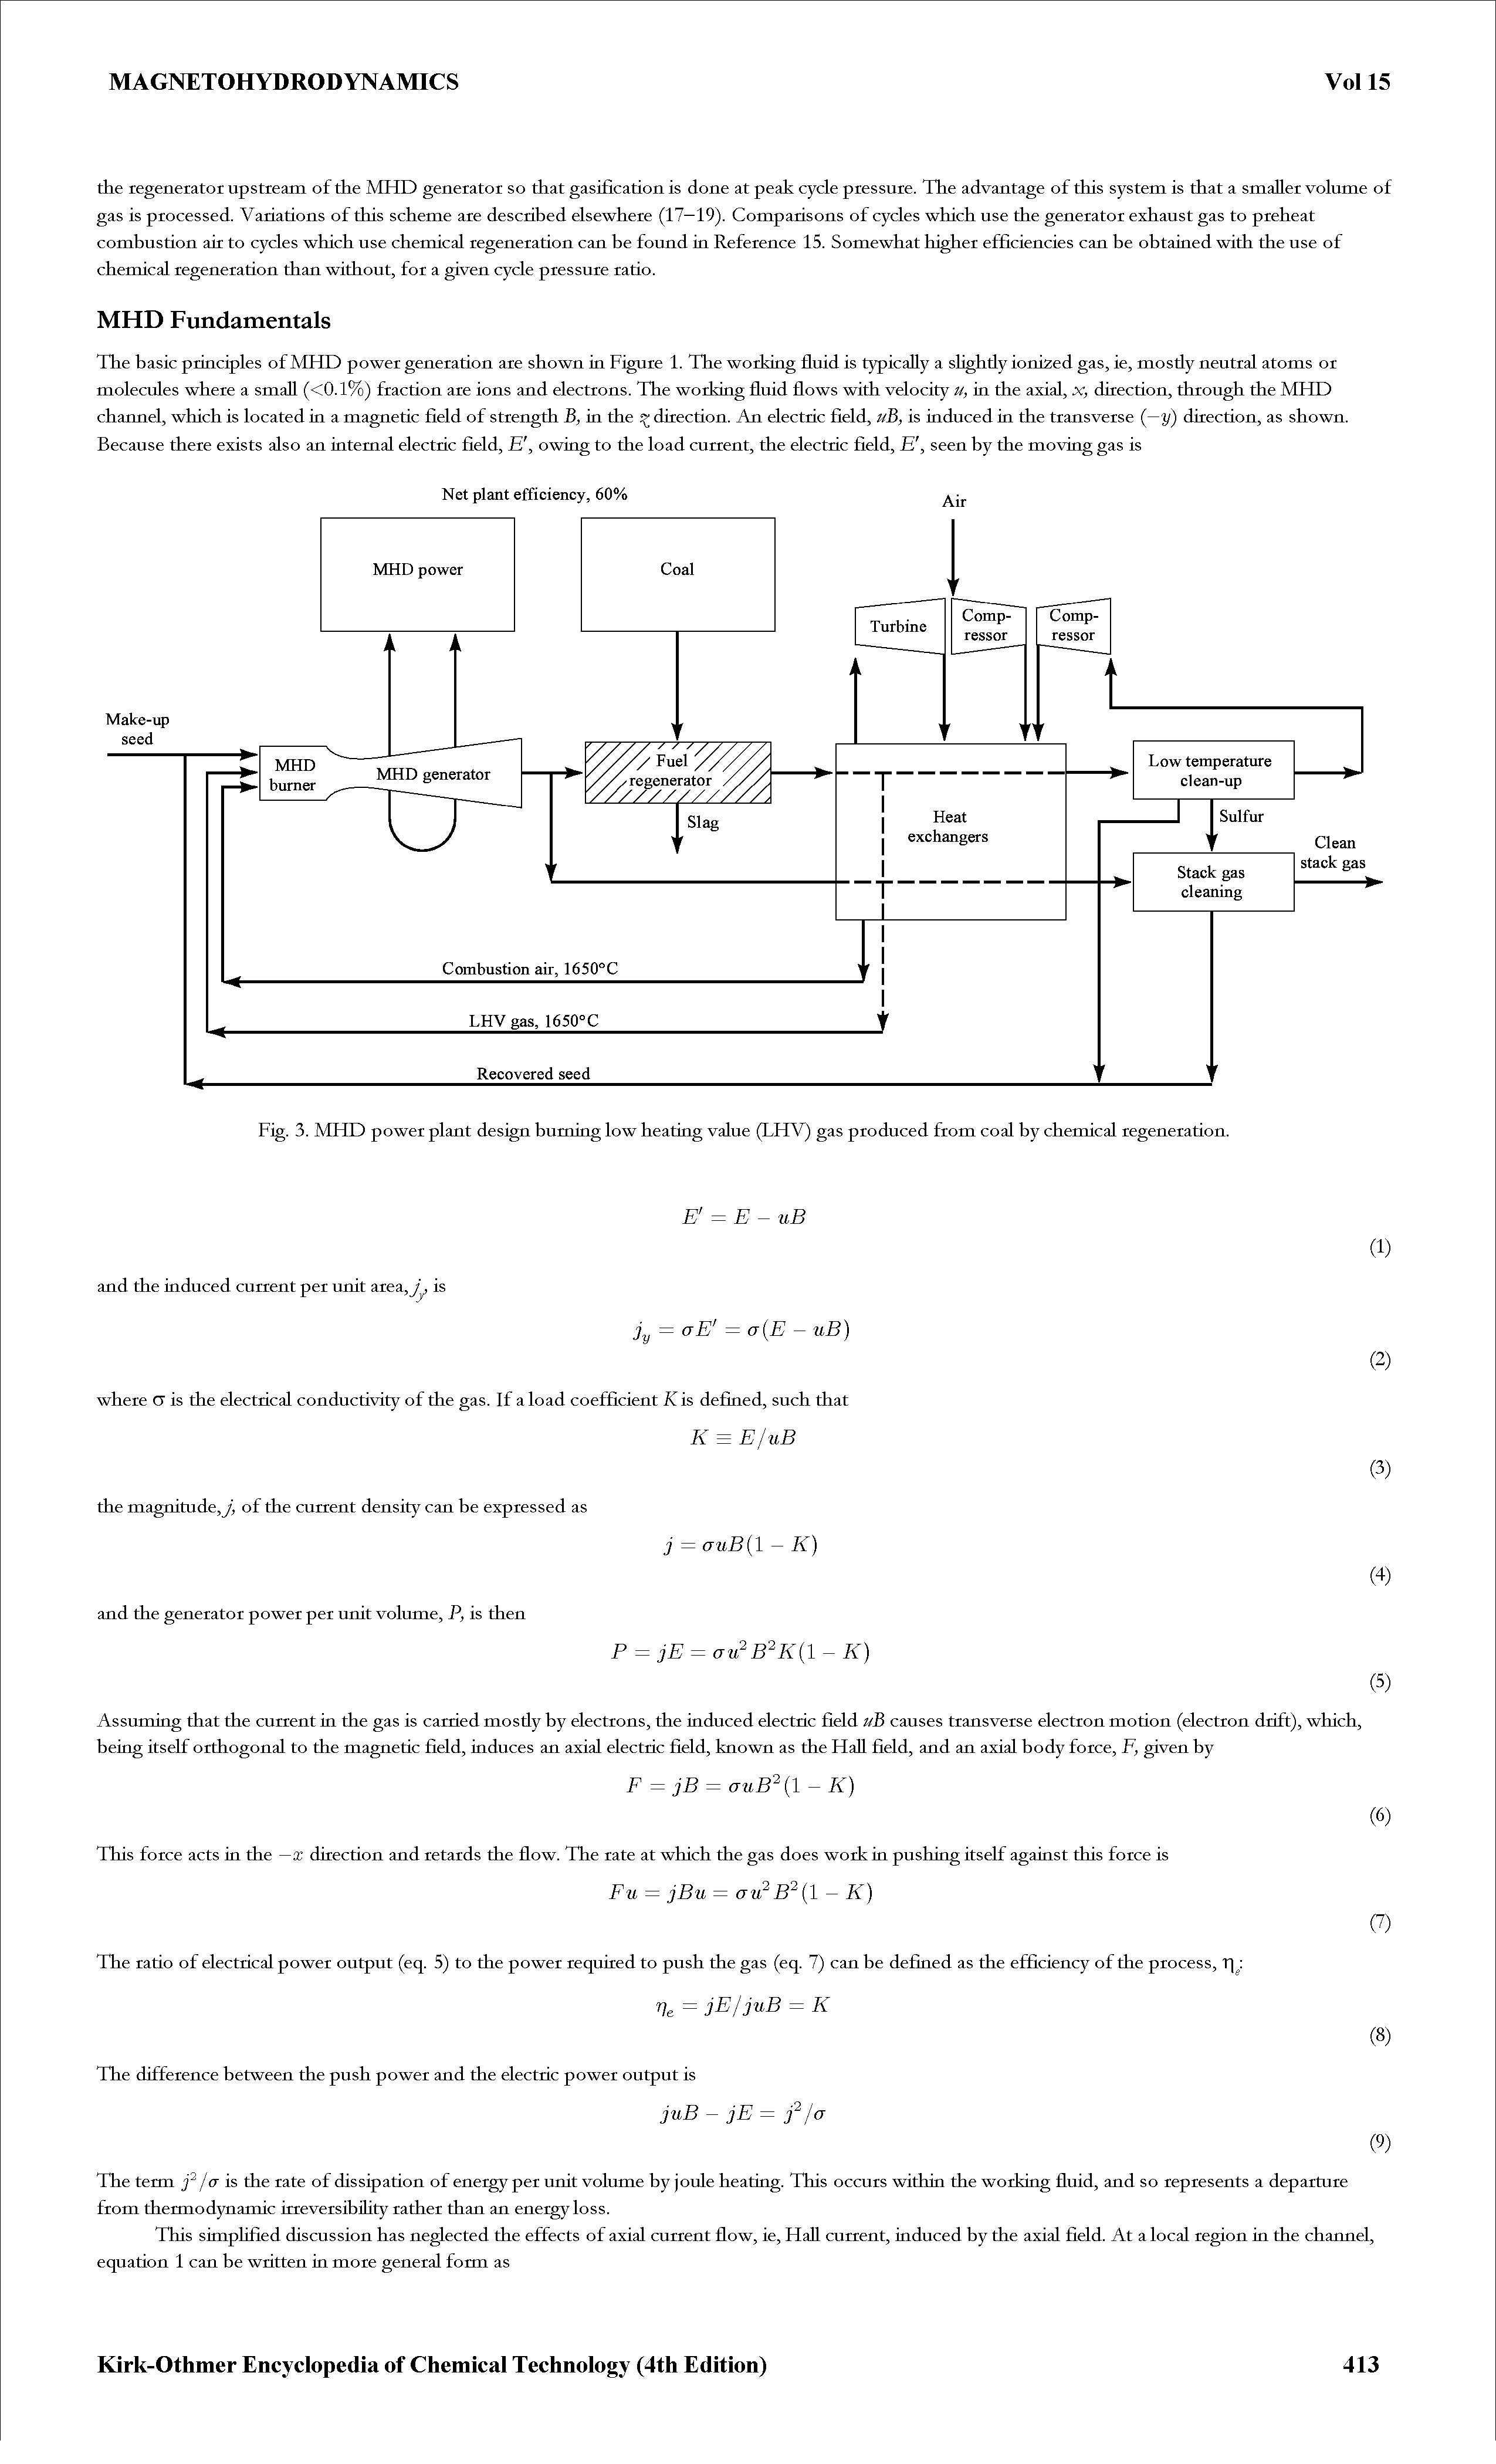 Fig. 3. MHD power plant design burning low heating value (LHV) gas produced from coal by chemical regeneration.